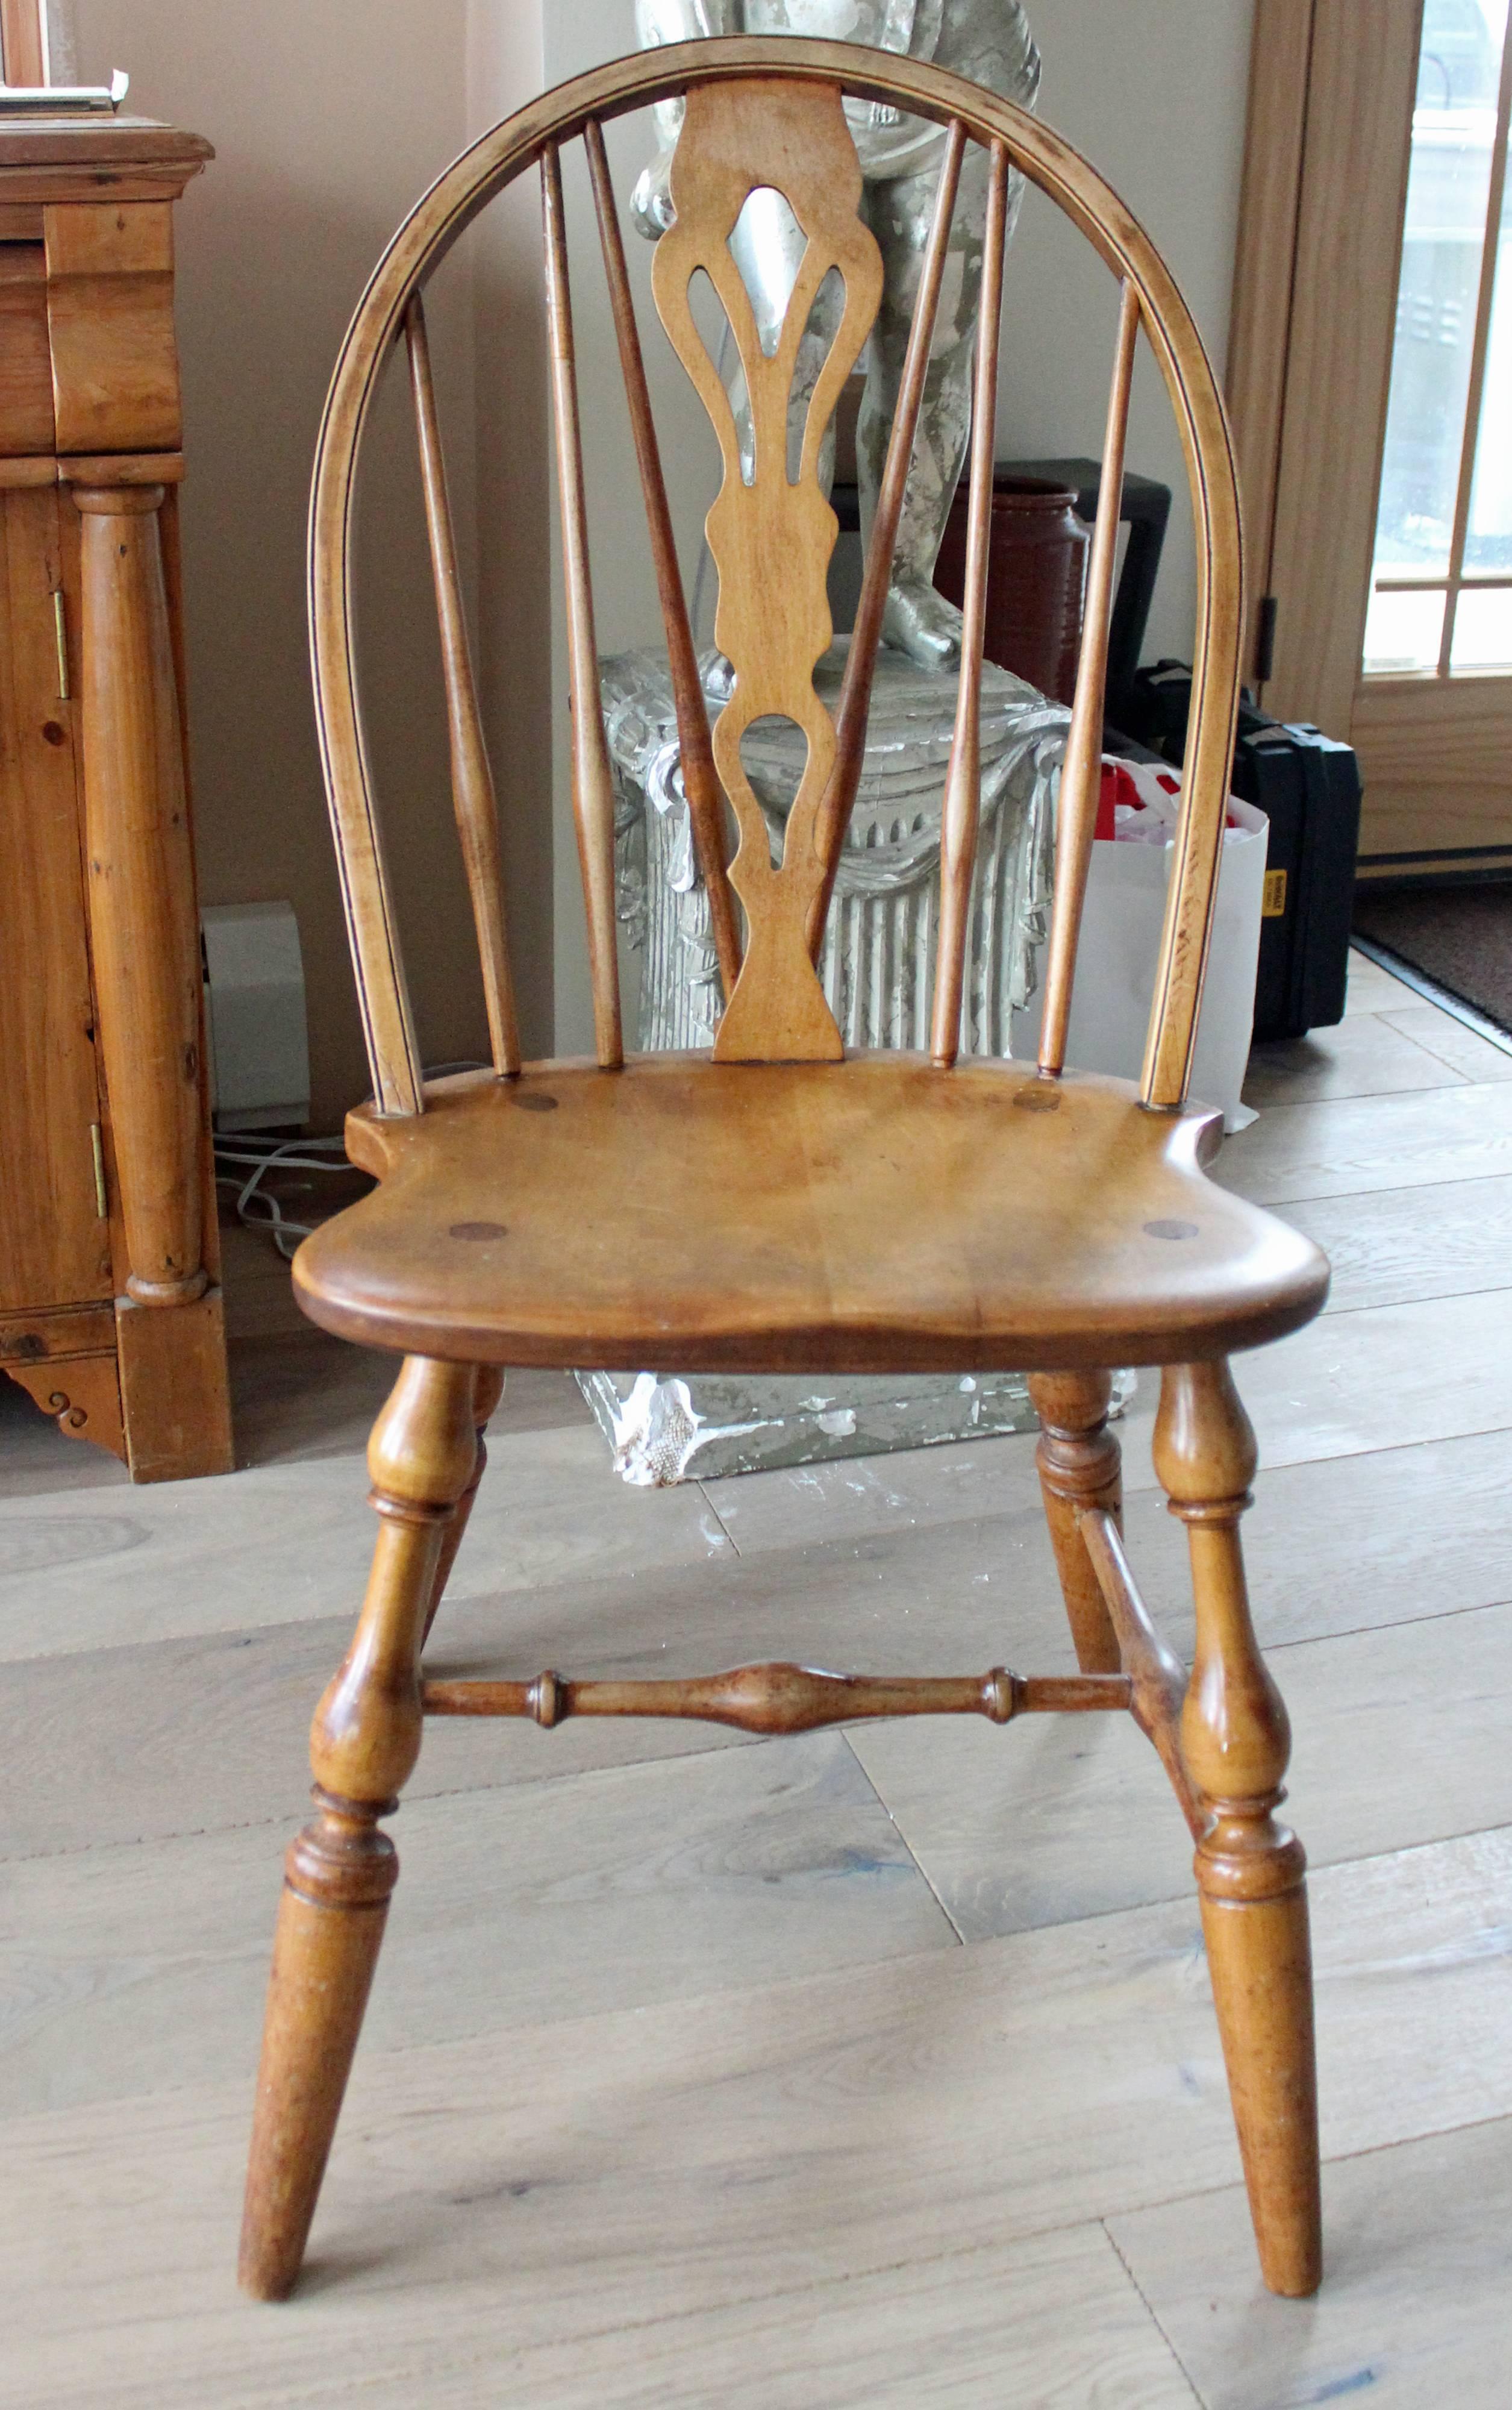 Eight fine English Windsor bow-brace back dining chairs with decorative splat and finely turned legs and stretcher, in ash with coordinated host and hostess chairs with rushed seating details.